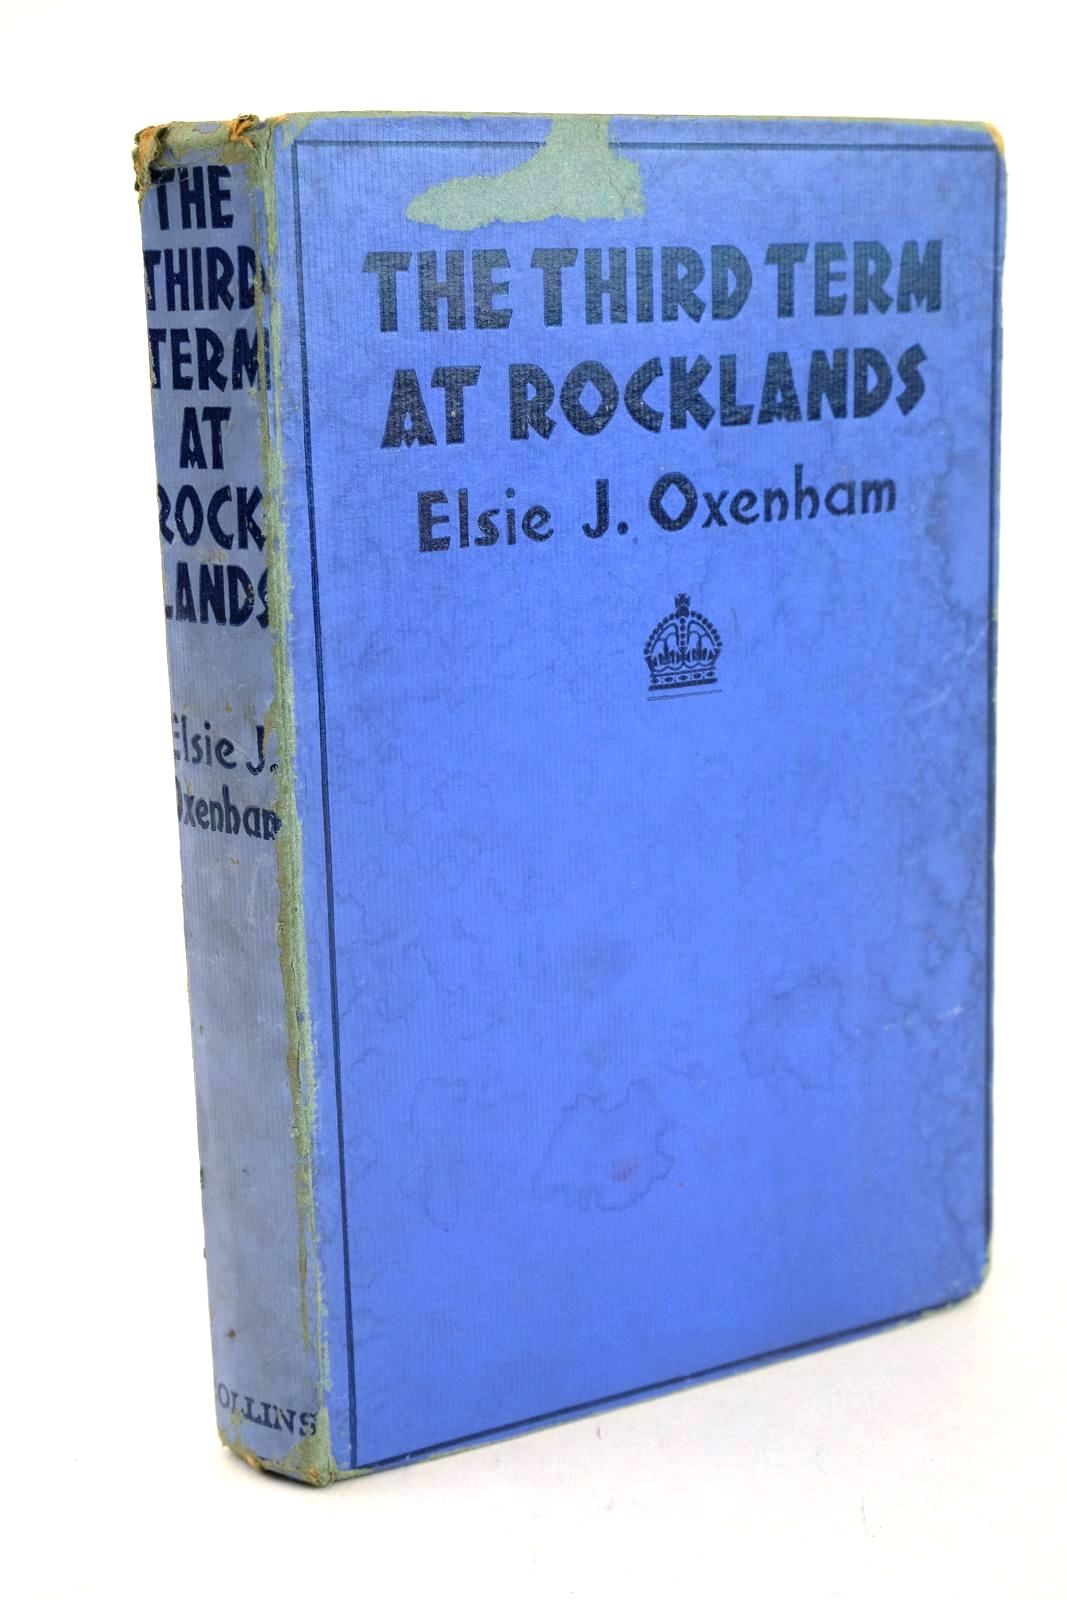 Photo of THE THIRD TERM AT ROCKLANDS written by Oxenham, Elsie J. published by Collins Clear-Type Press (STOCK CODE: 1327254)  for sale by Stella & Rose's Books